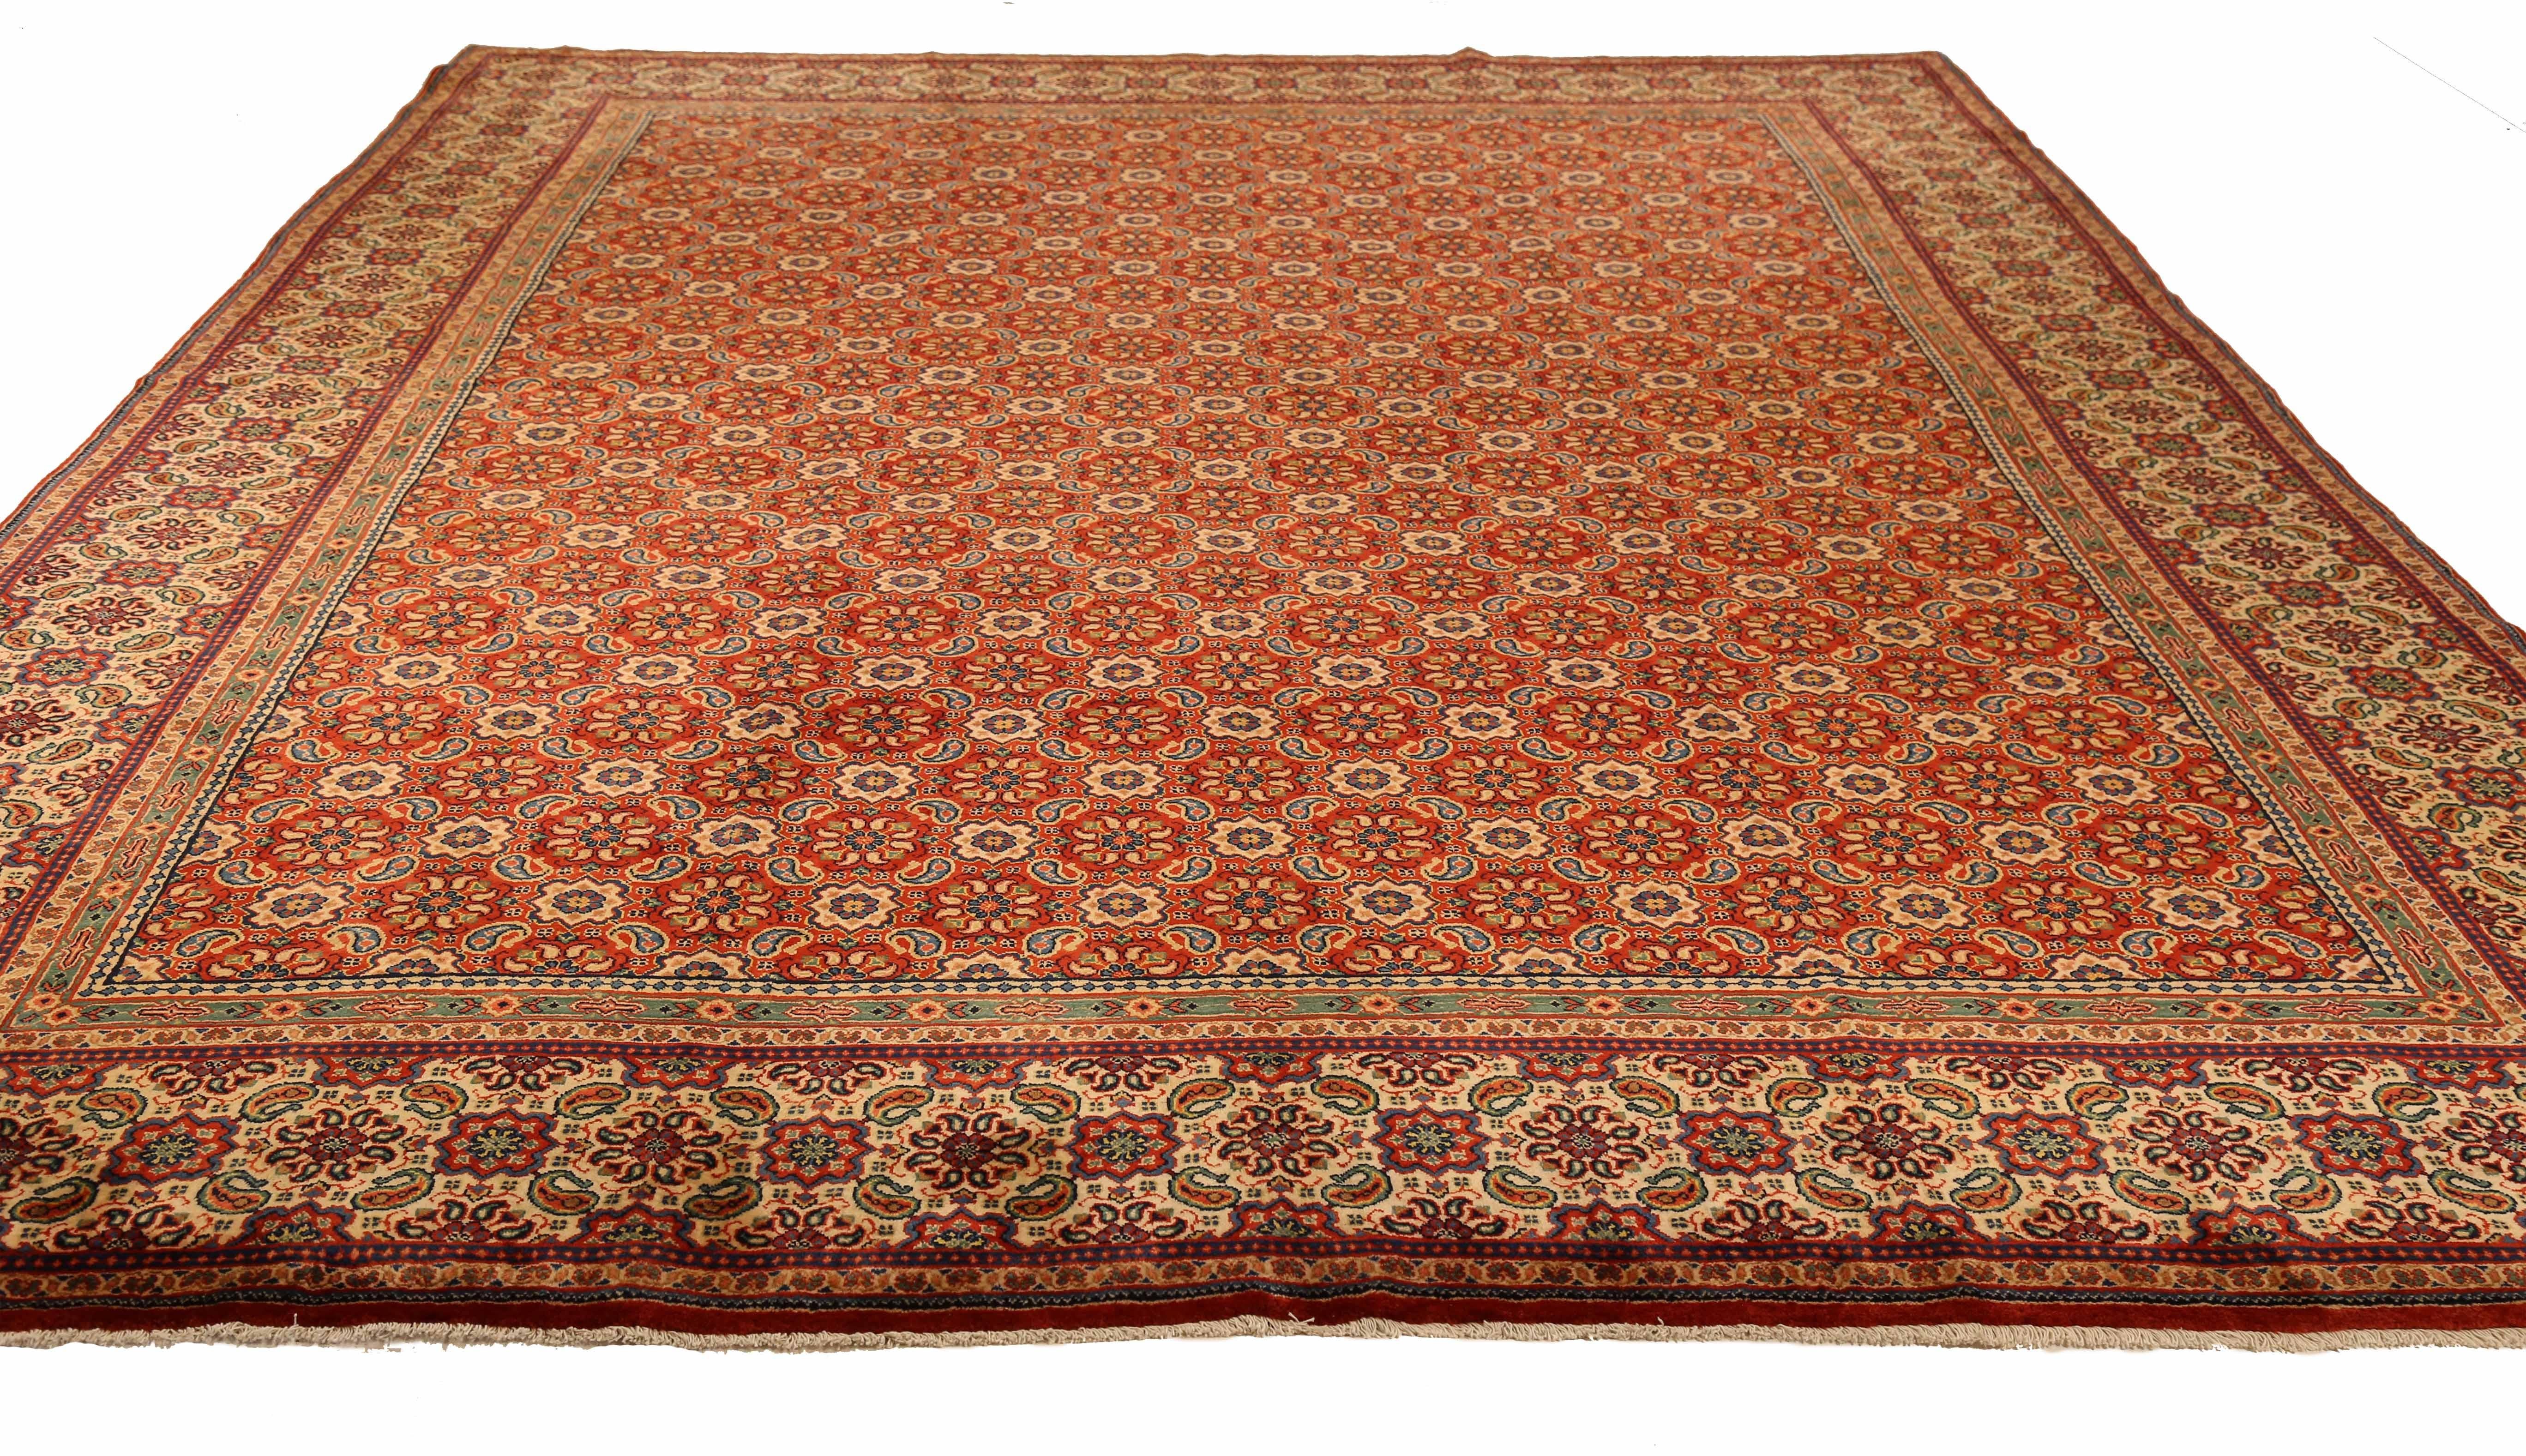 This stunning vintage Persian area rug boasts a rich tradition, handwoven by skilled artisans using the finest sheep's wool and all-natural vegetable dyes, ensuring its safety for both humans and pets. The rug features a classic Sarouk design,